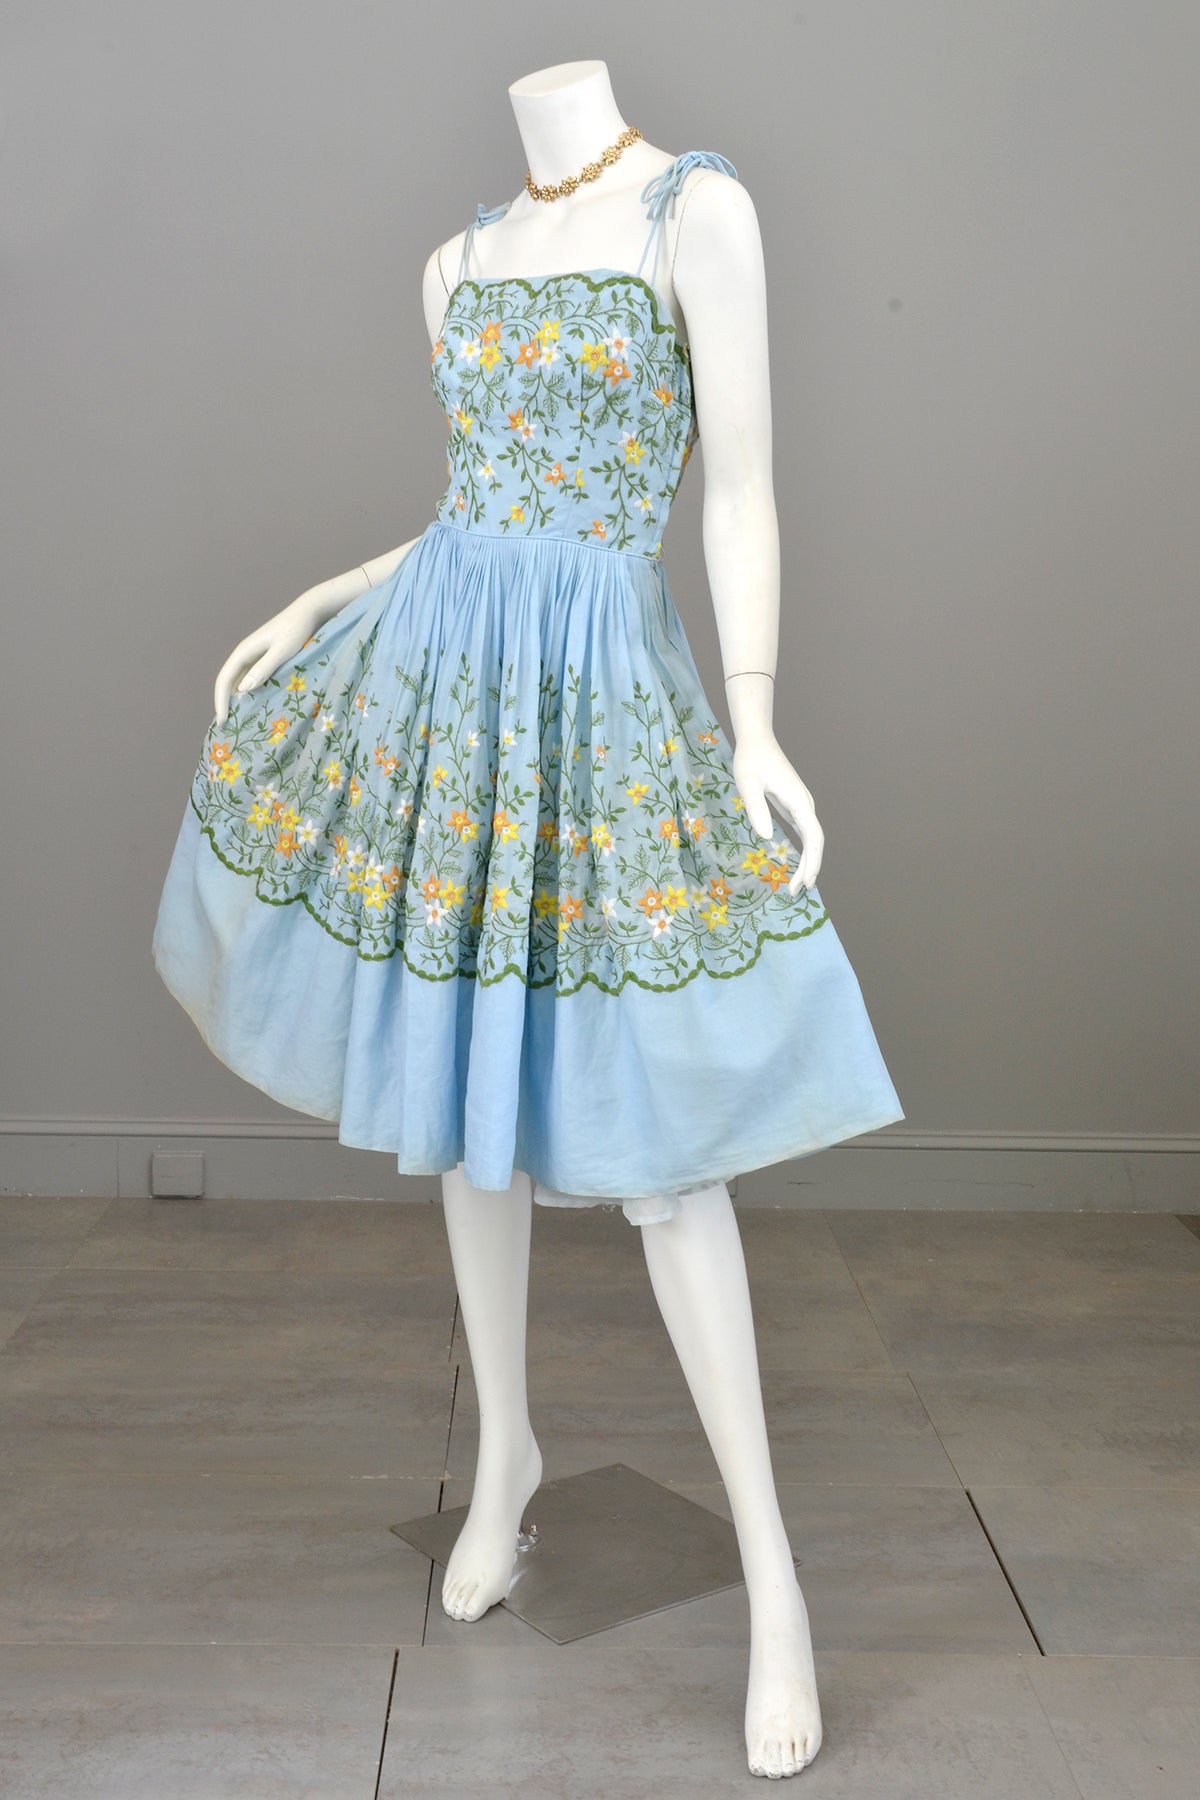 1950s Pale Sky Blue Embroidered Patio Dress | 1950s Party Dress | 1950s Embroidered Patio Dress